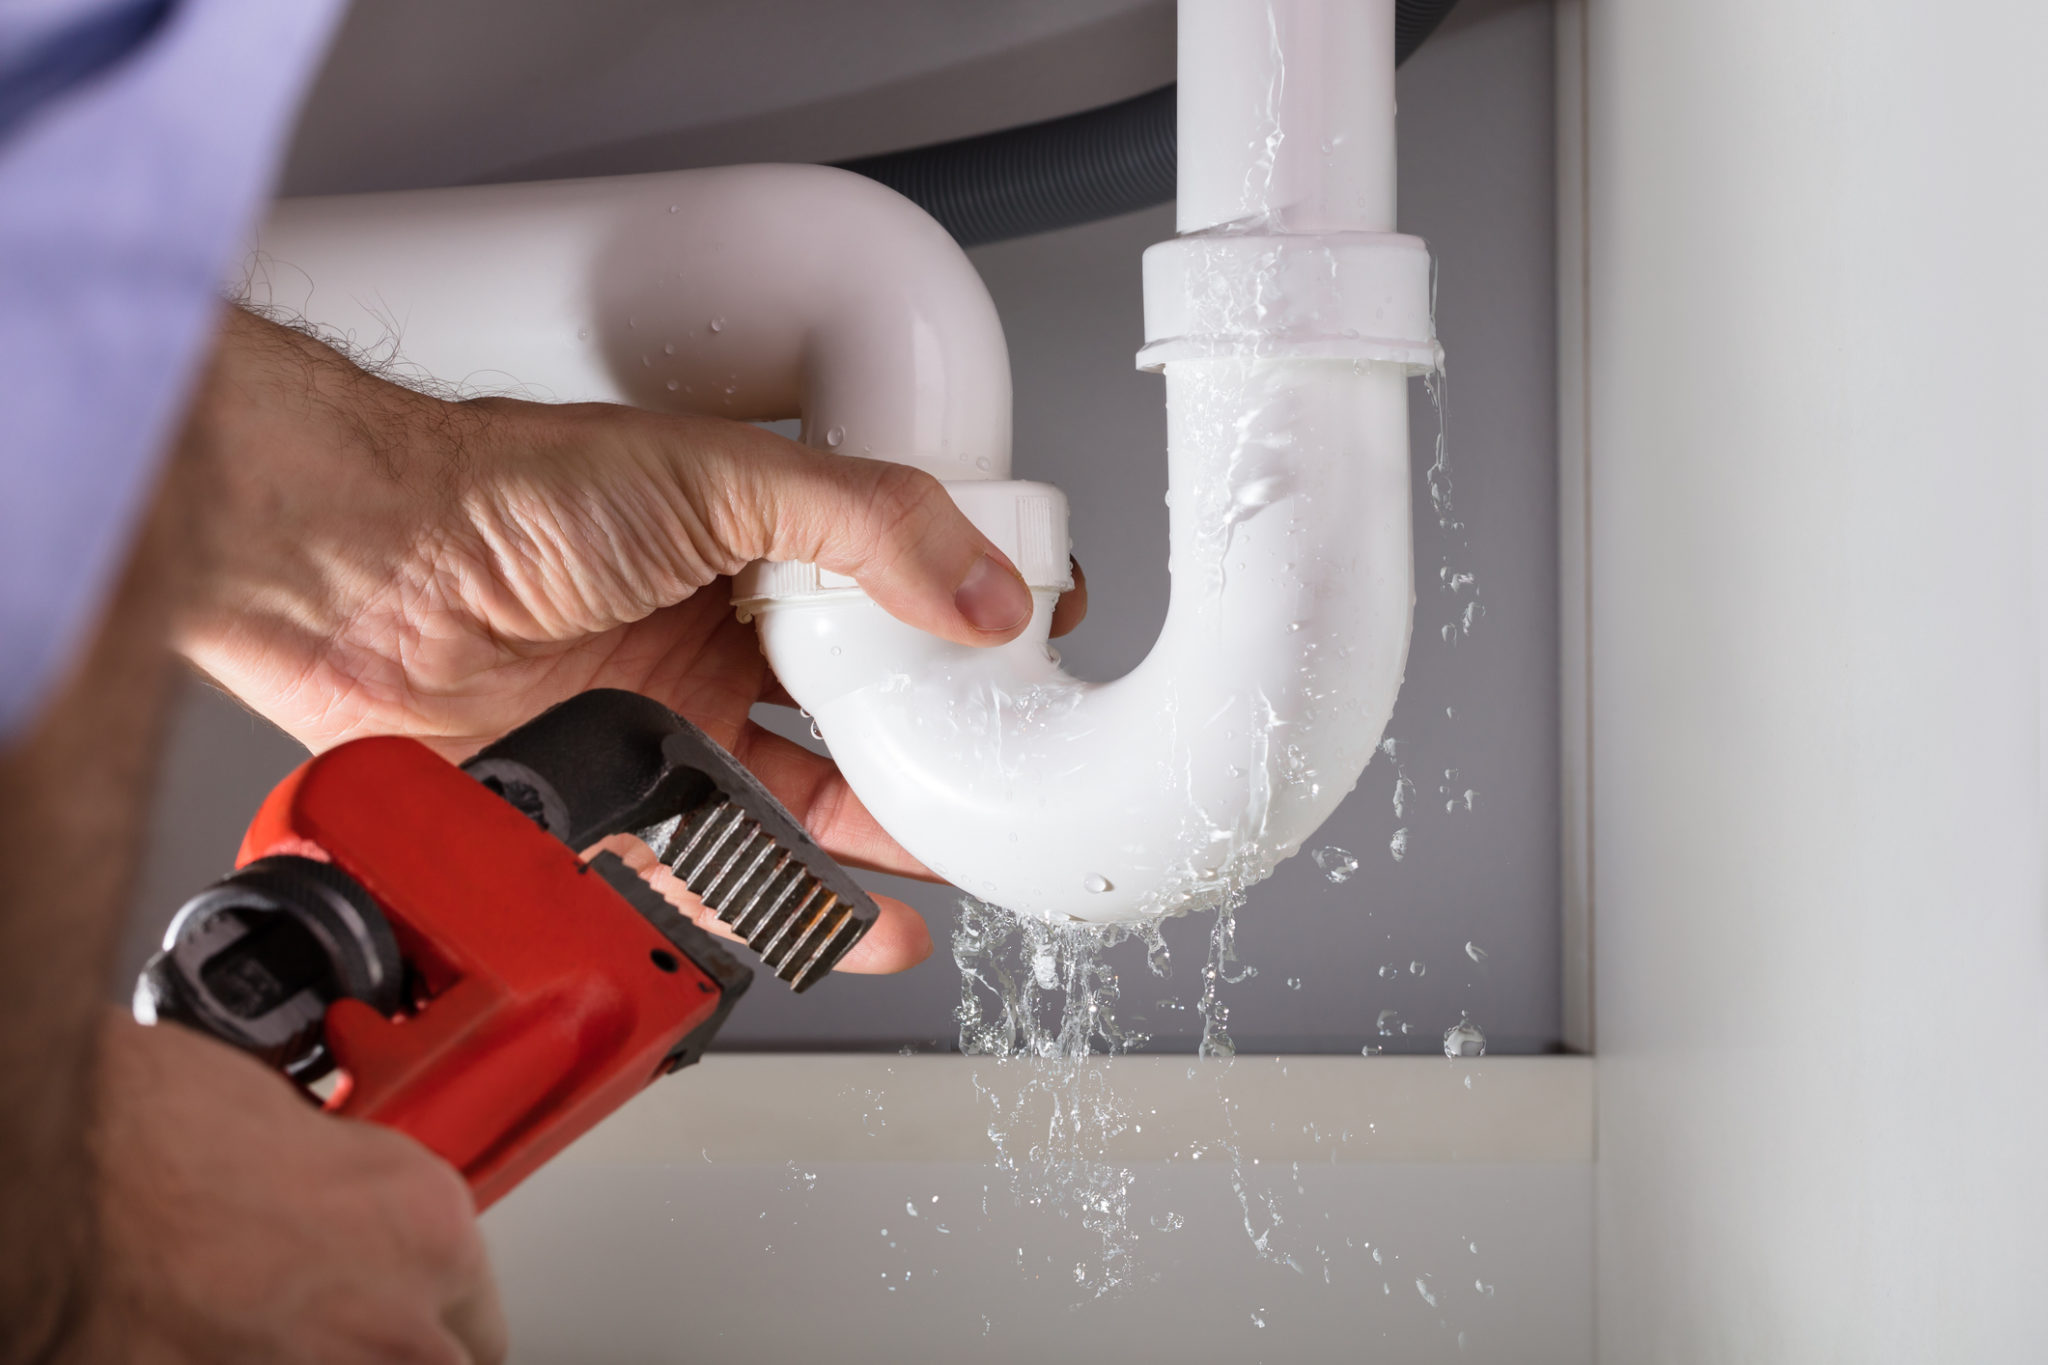 How Does Home Plumbing Work